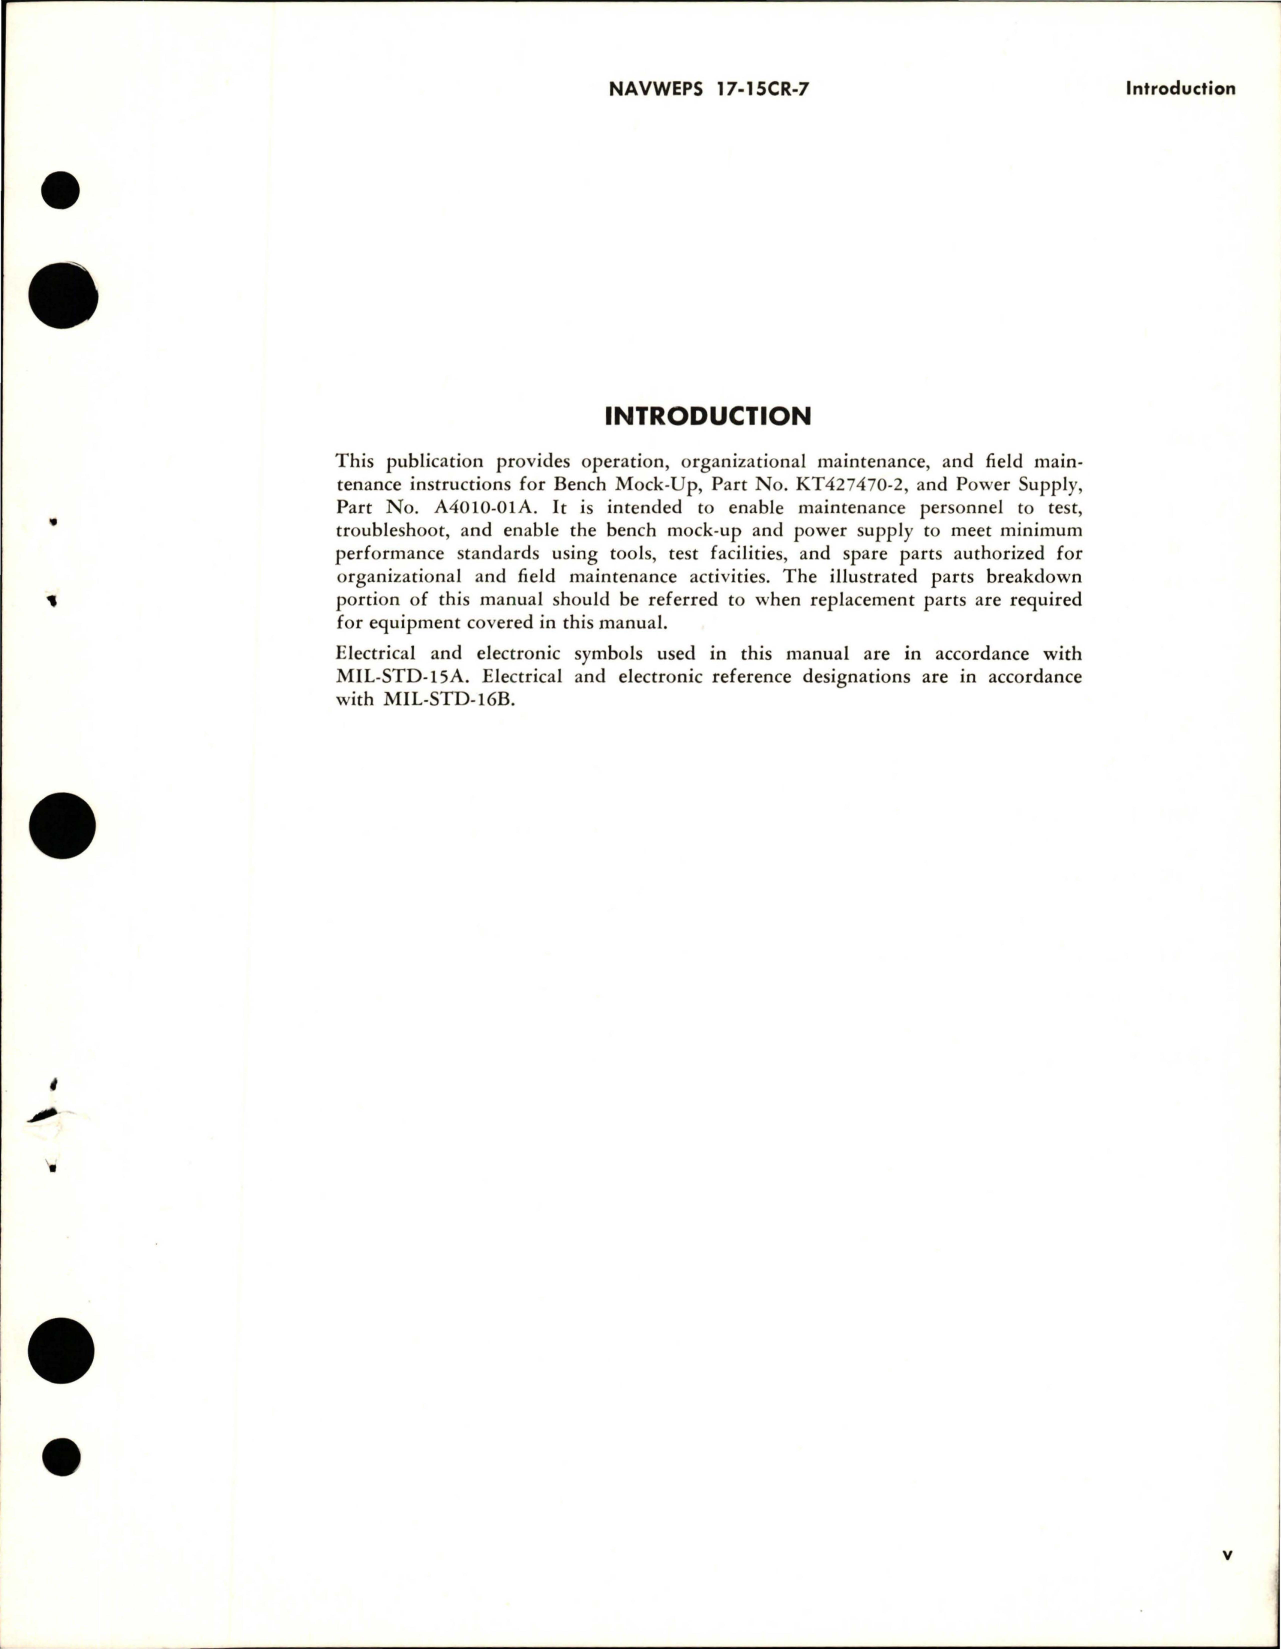 Sample page 7 from AirCorps Library document: Operation and Service Instructions with Illustrated Parts for Bench Mock Up - Part KT427470-2, and Power Supply - Part A4010-01A